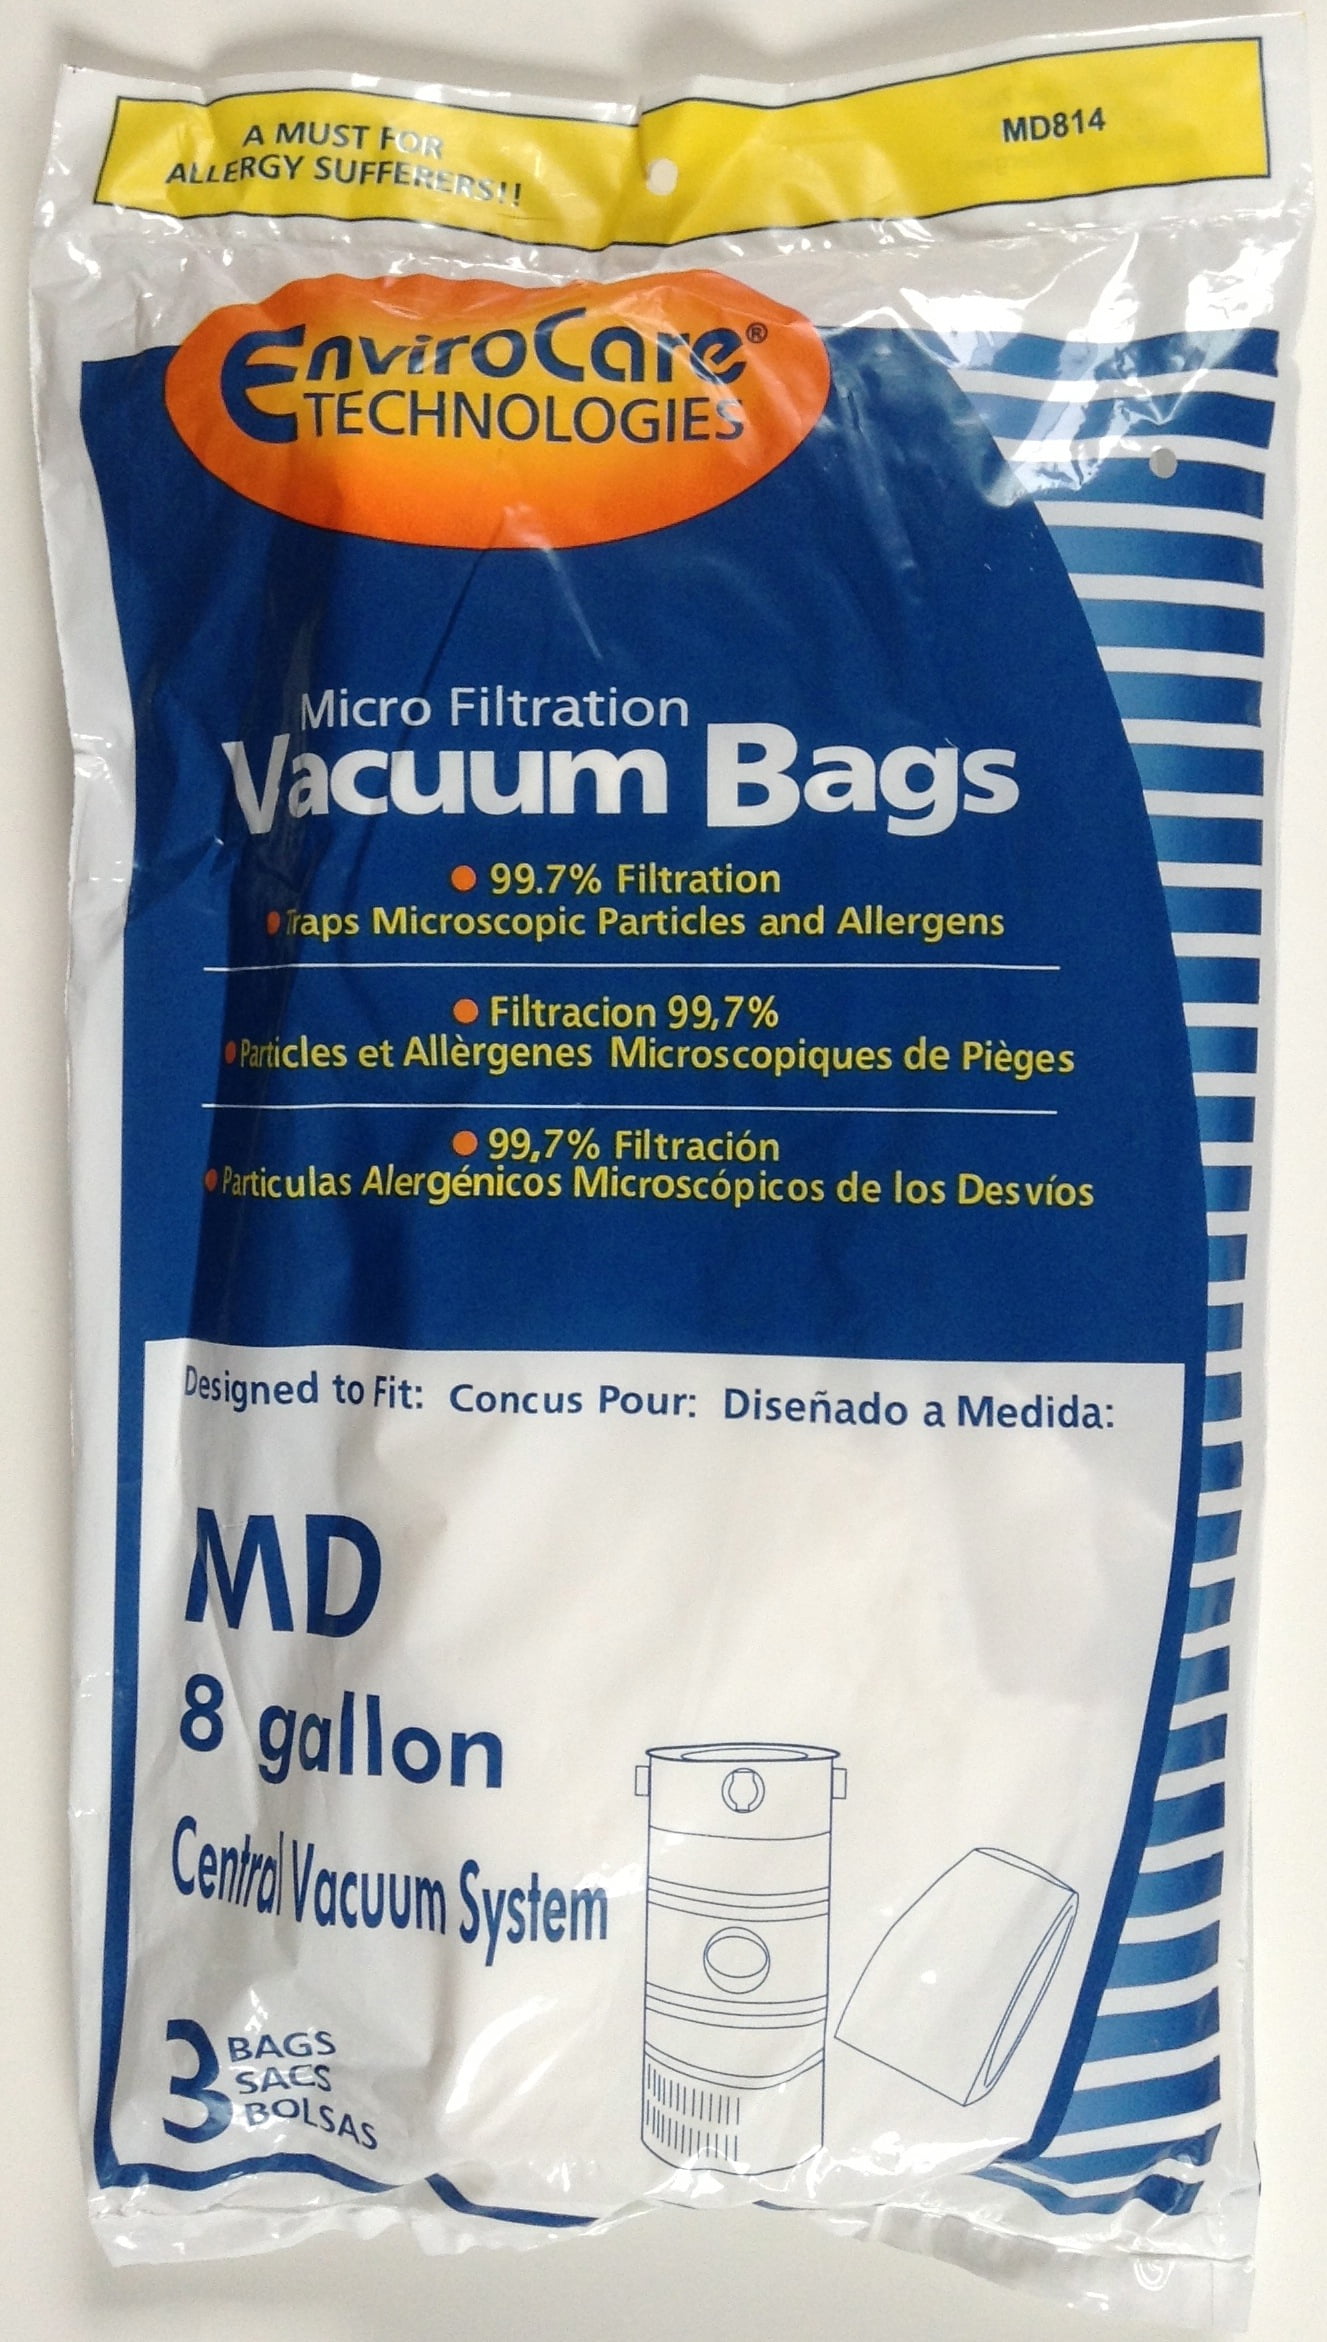 Modern Day 8 Gallon MD814 Central Replacement Vacuum 3 Bags 